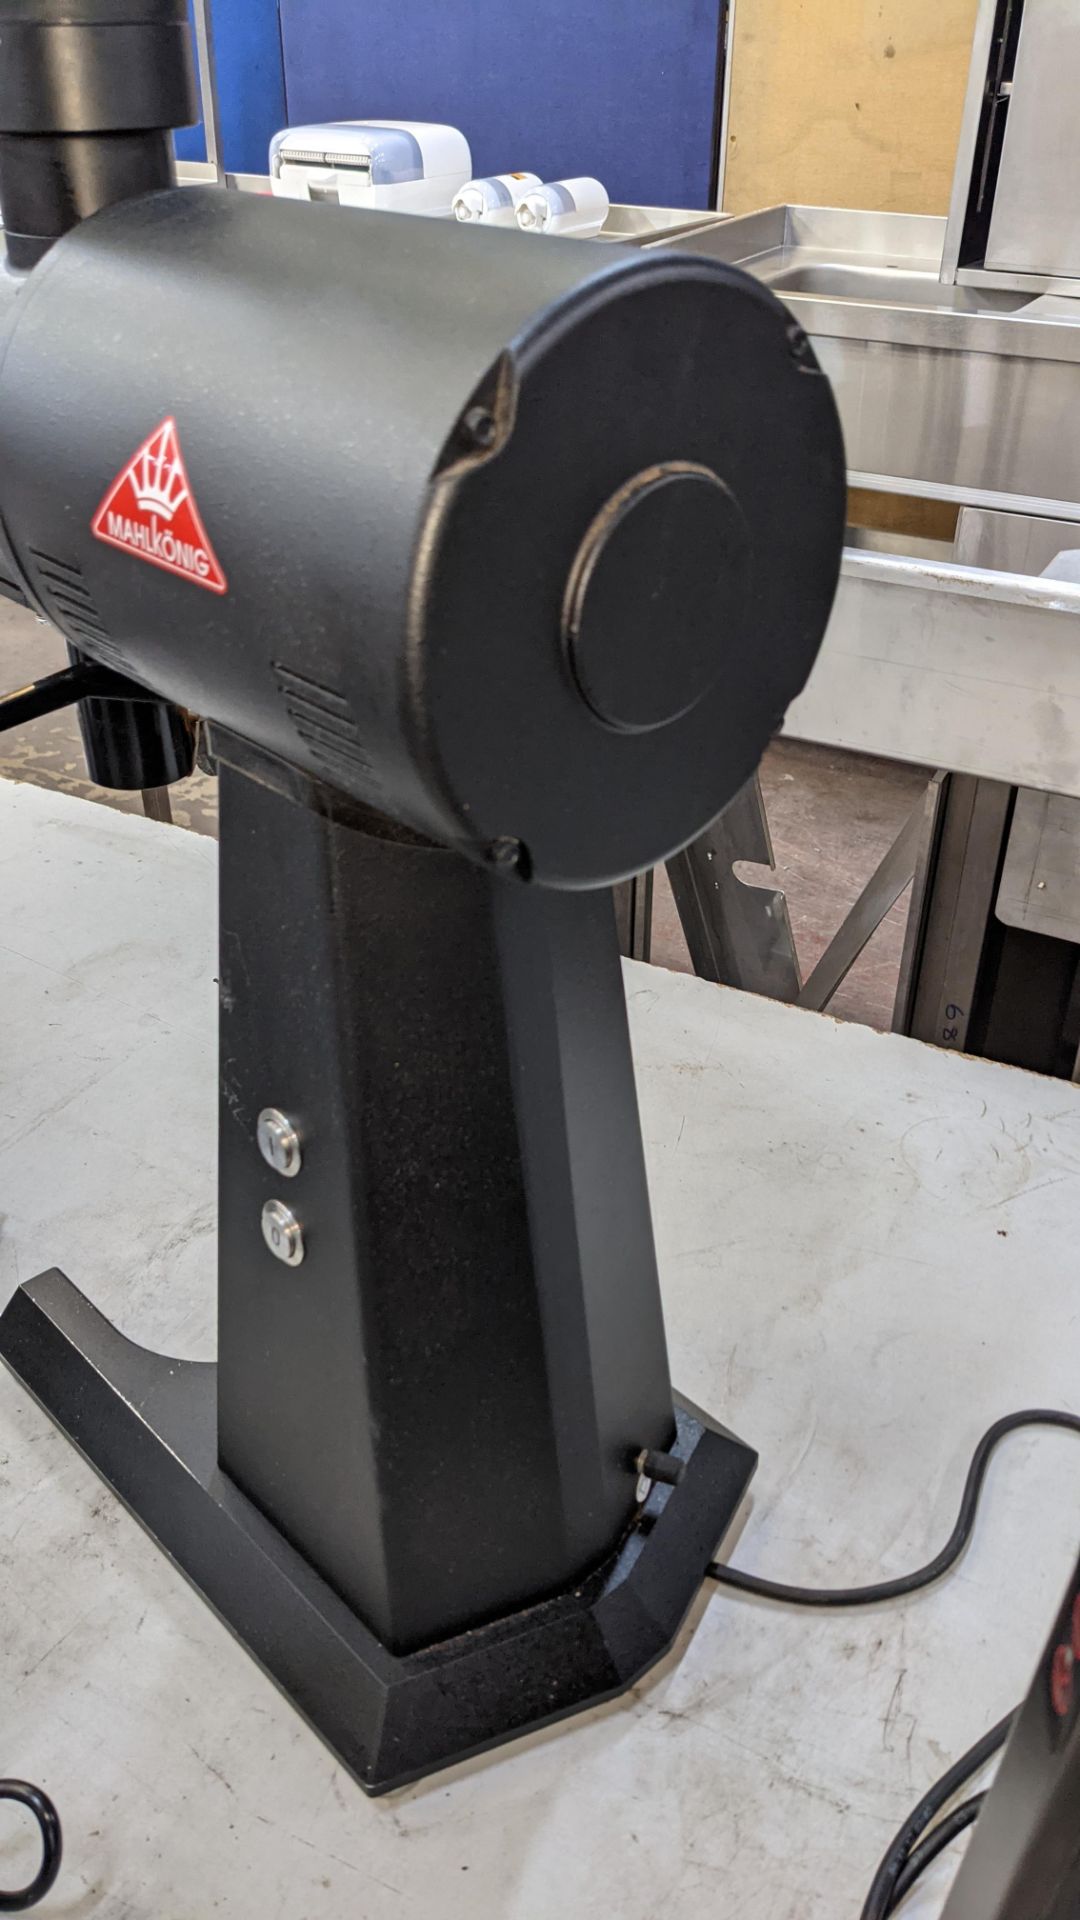 2019 Mahlkoenig model EK43 commercial coffee grinder, purchased in mid-2019 for approx. £2,000 plus - Image 8 of 15